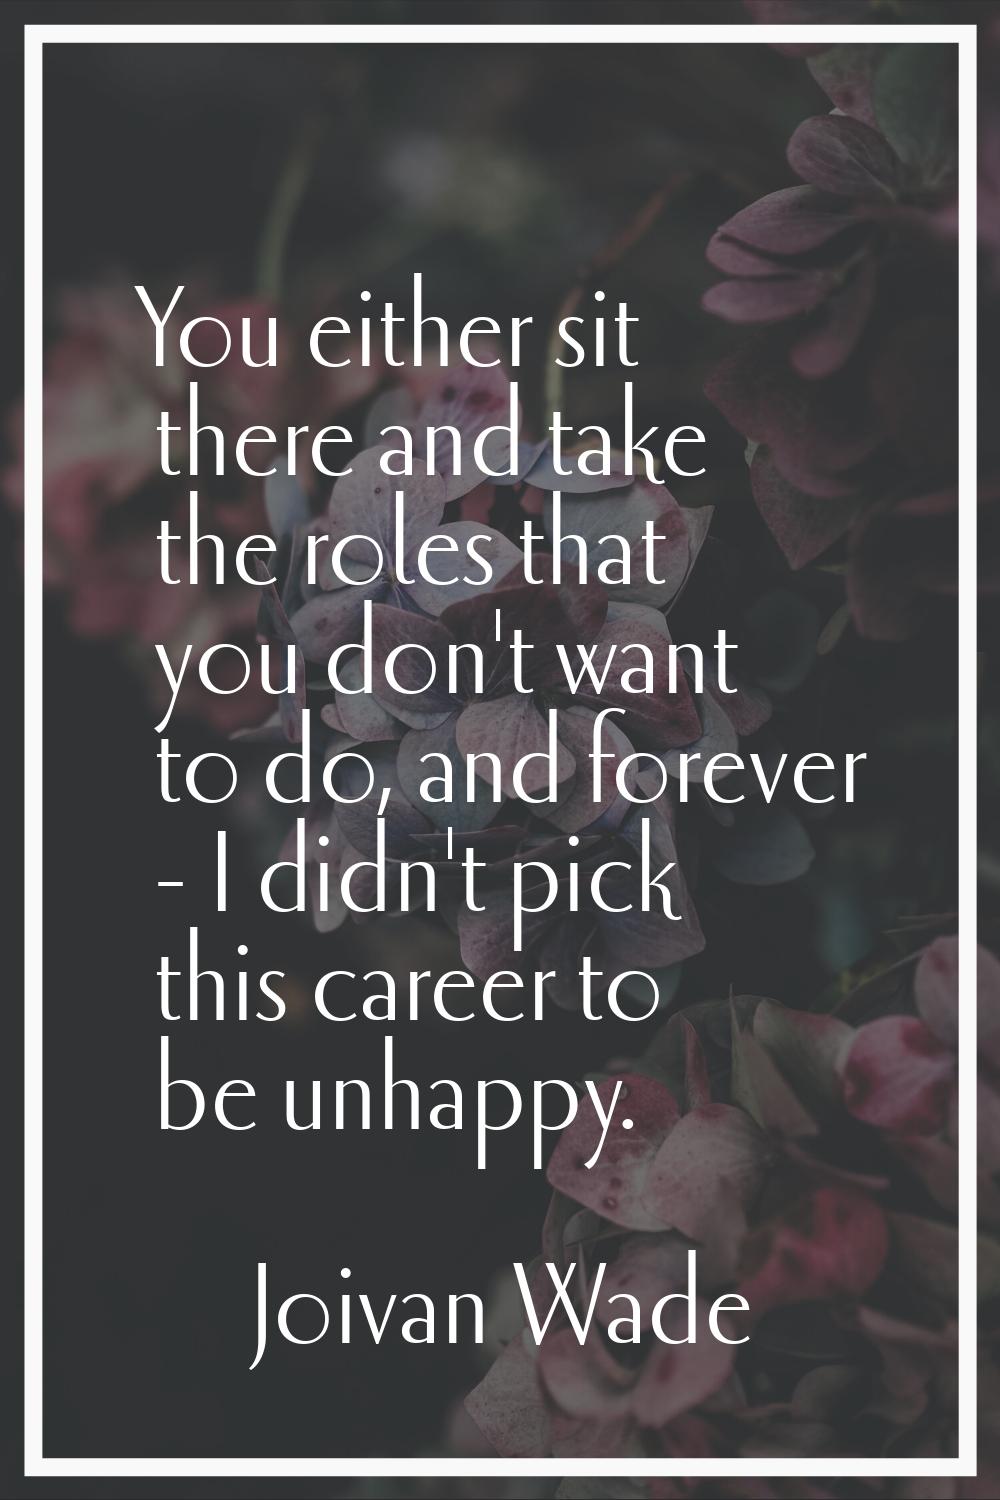 You either sit there and take the roles that you don't want to do, and forever - I didn't pick this